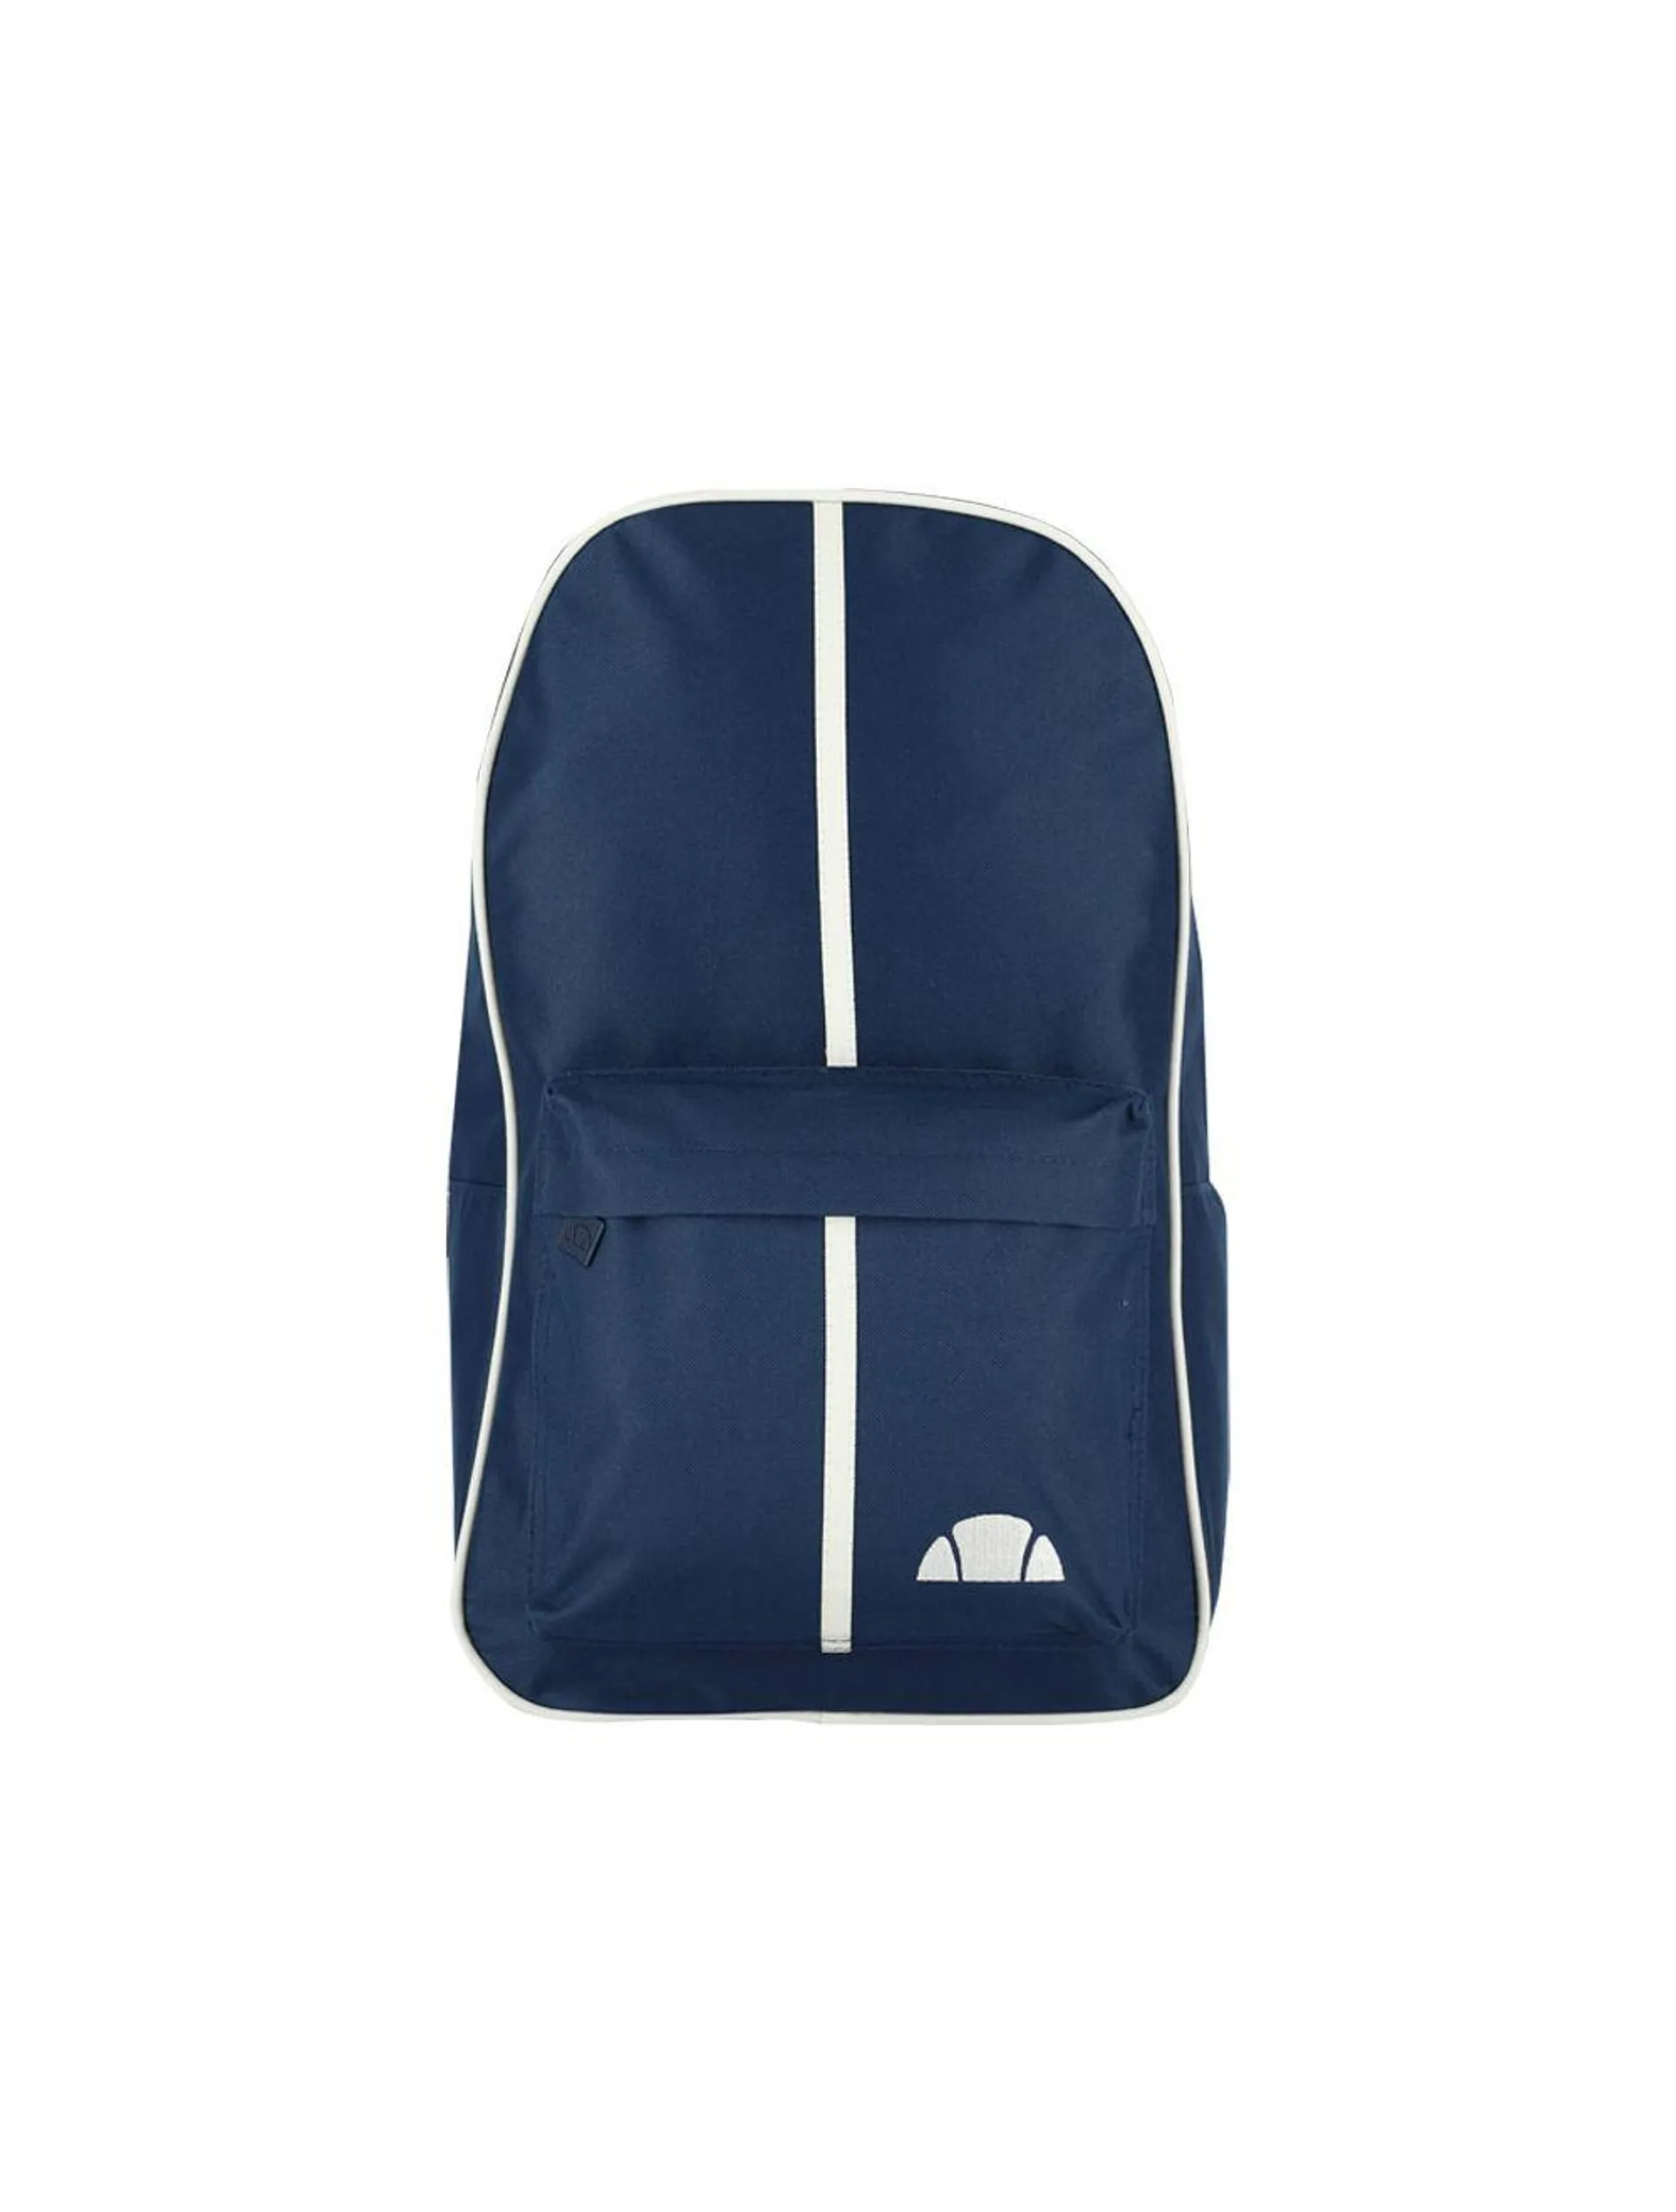 ellesse Piping Detail Backpack Navy/White